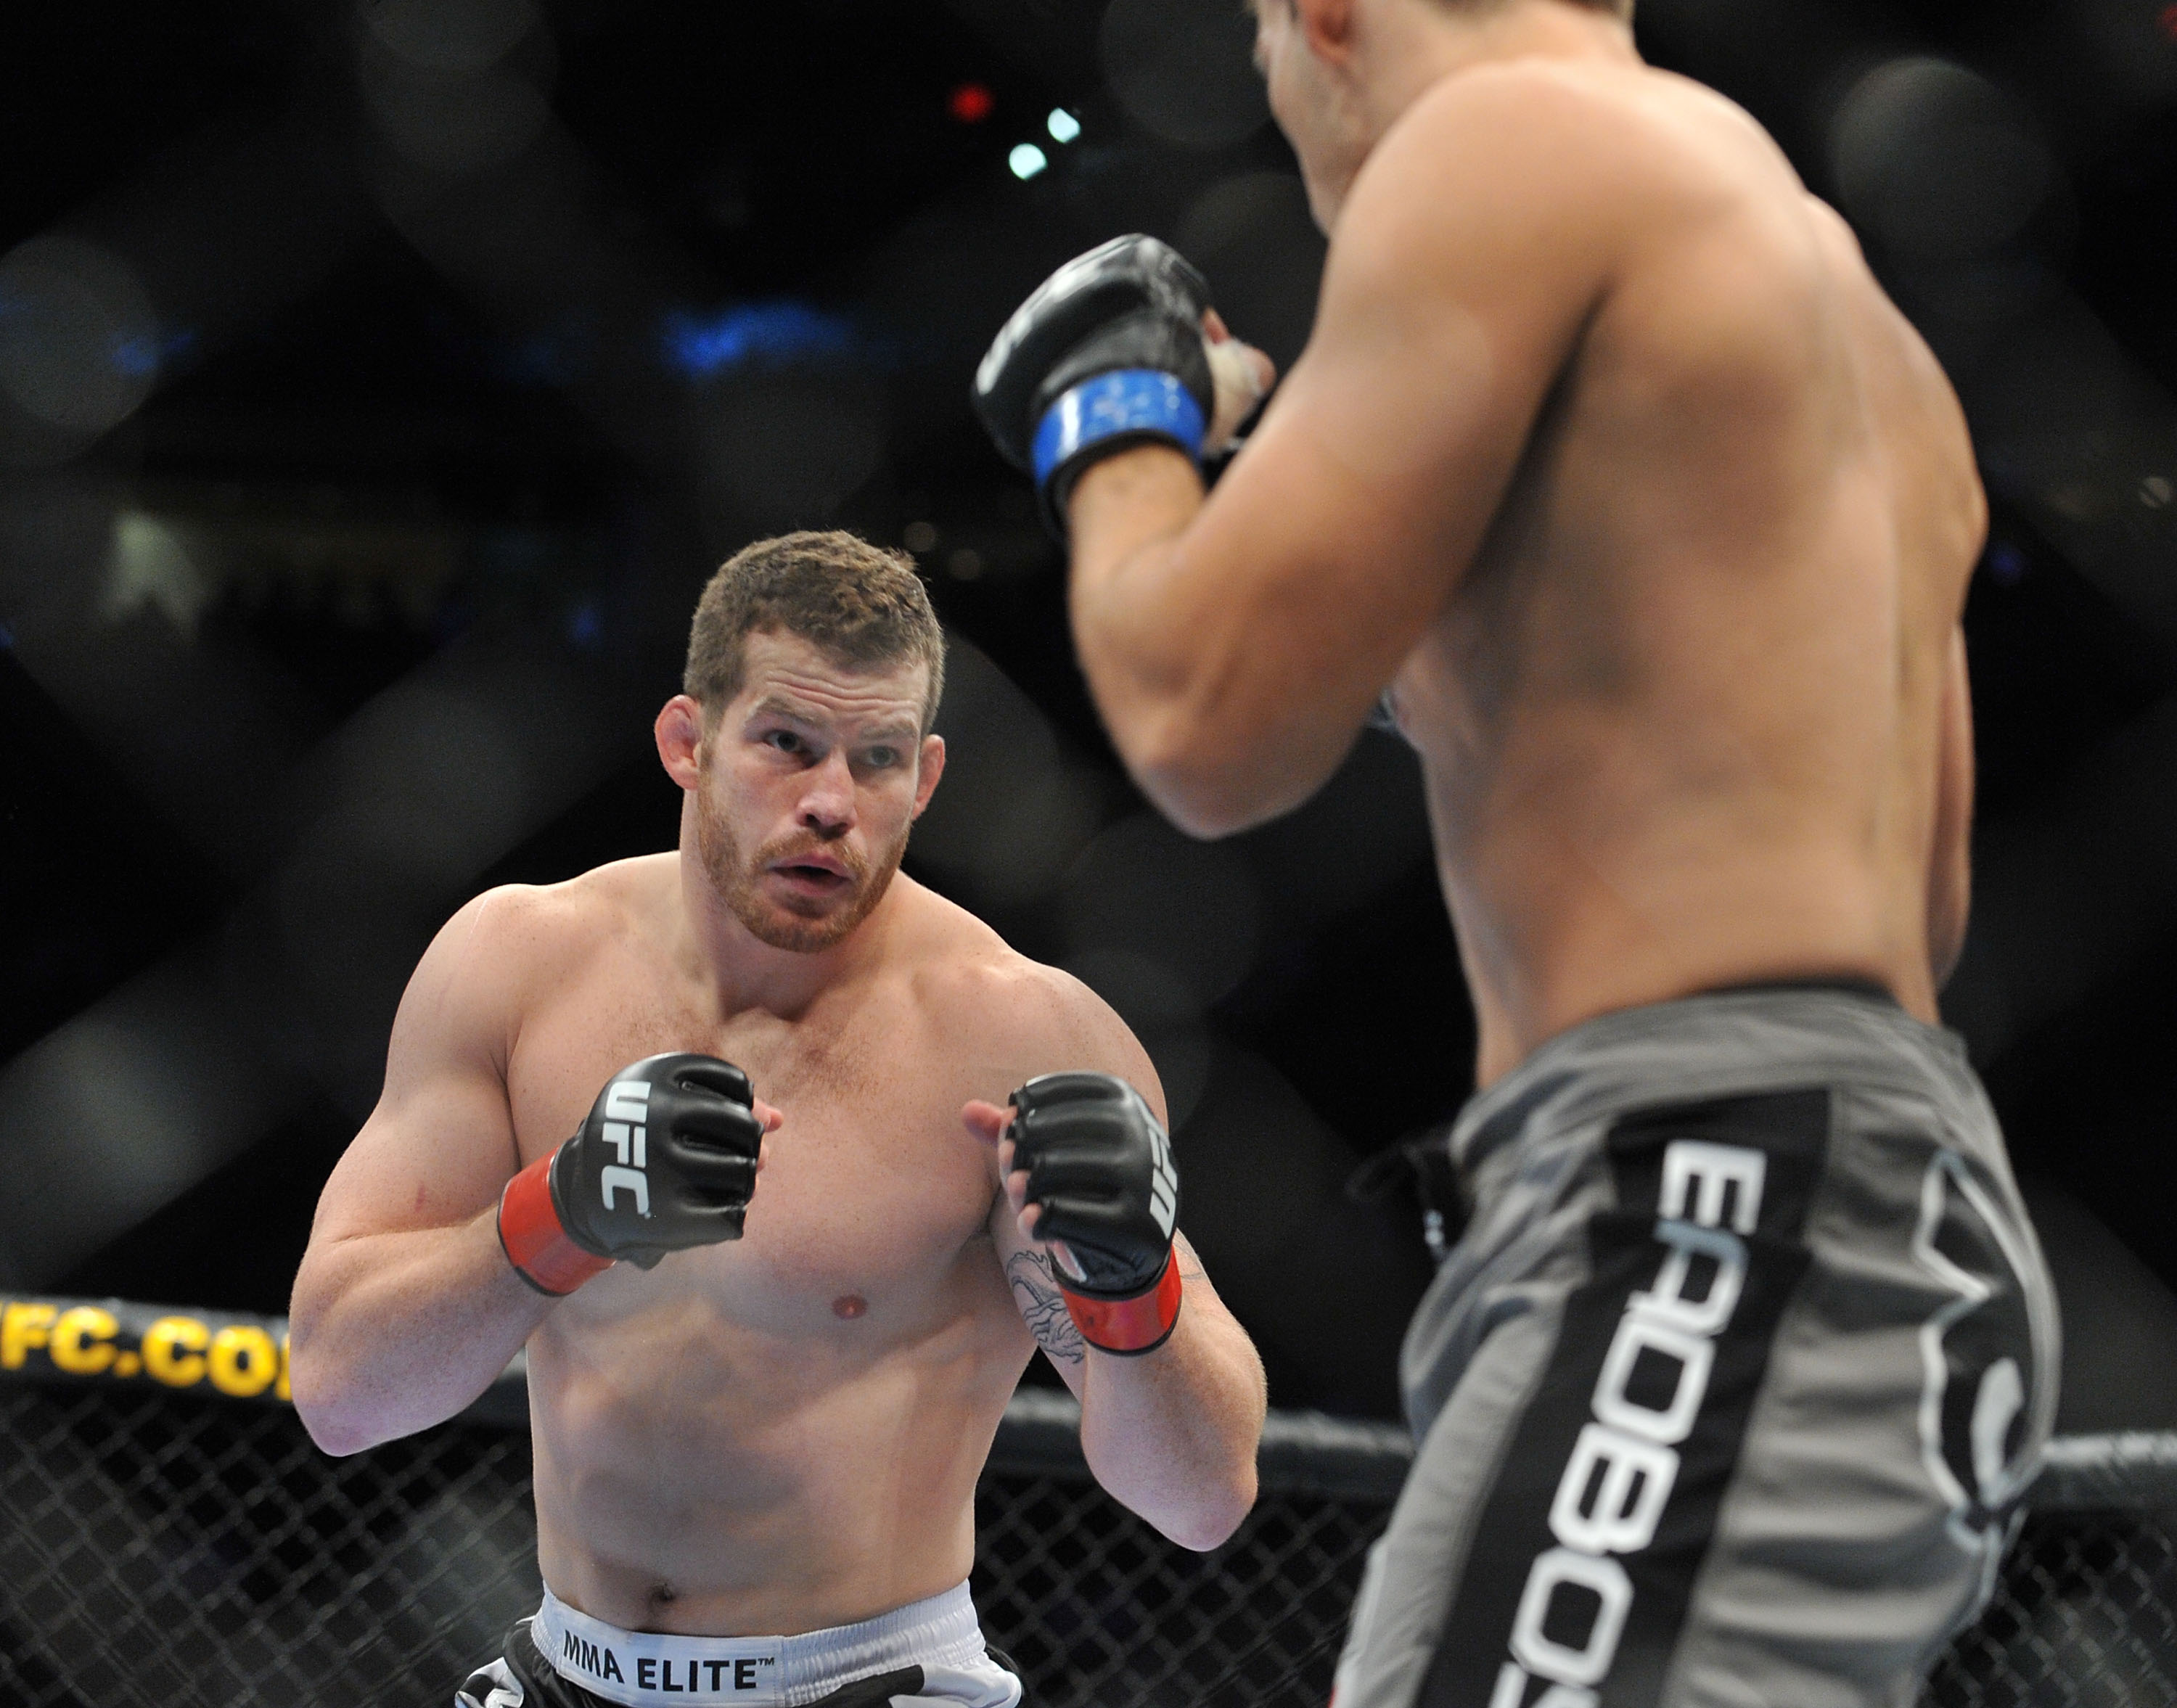 PORTLAND, OR - AUGUST 29:  UFC fighter Nate Marquardt (L) battles UFC fighter Demian Maia (R) during their Middleweight bout at UFC 102:  Couture vs. Nogueira at the Rose Garden Arena on August 29, 2009 in Portland, Oregon.  (Photo by Jon Kopaloff/Getty I